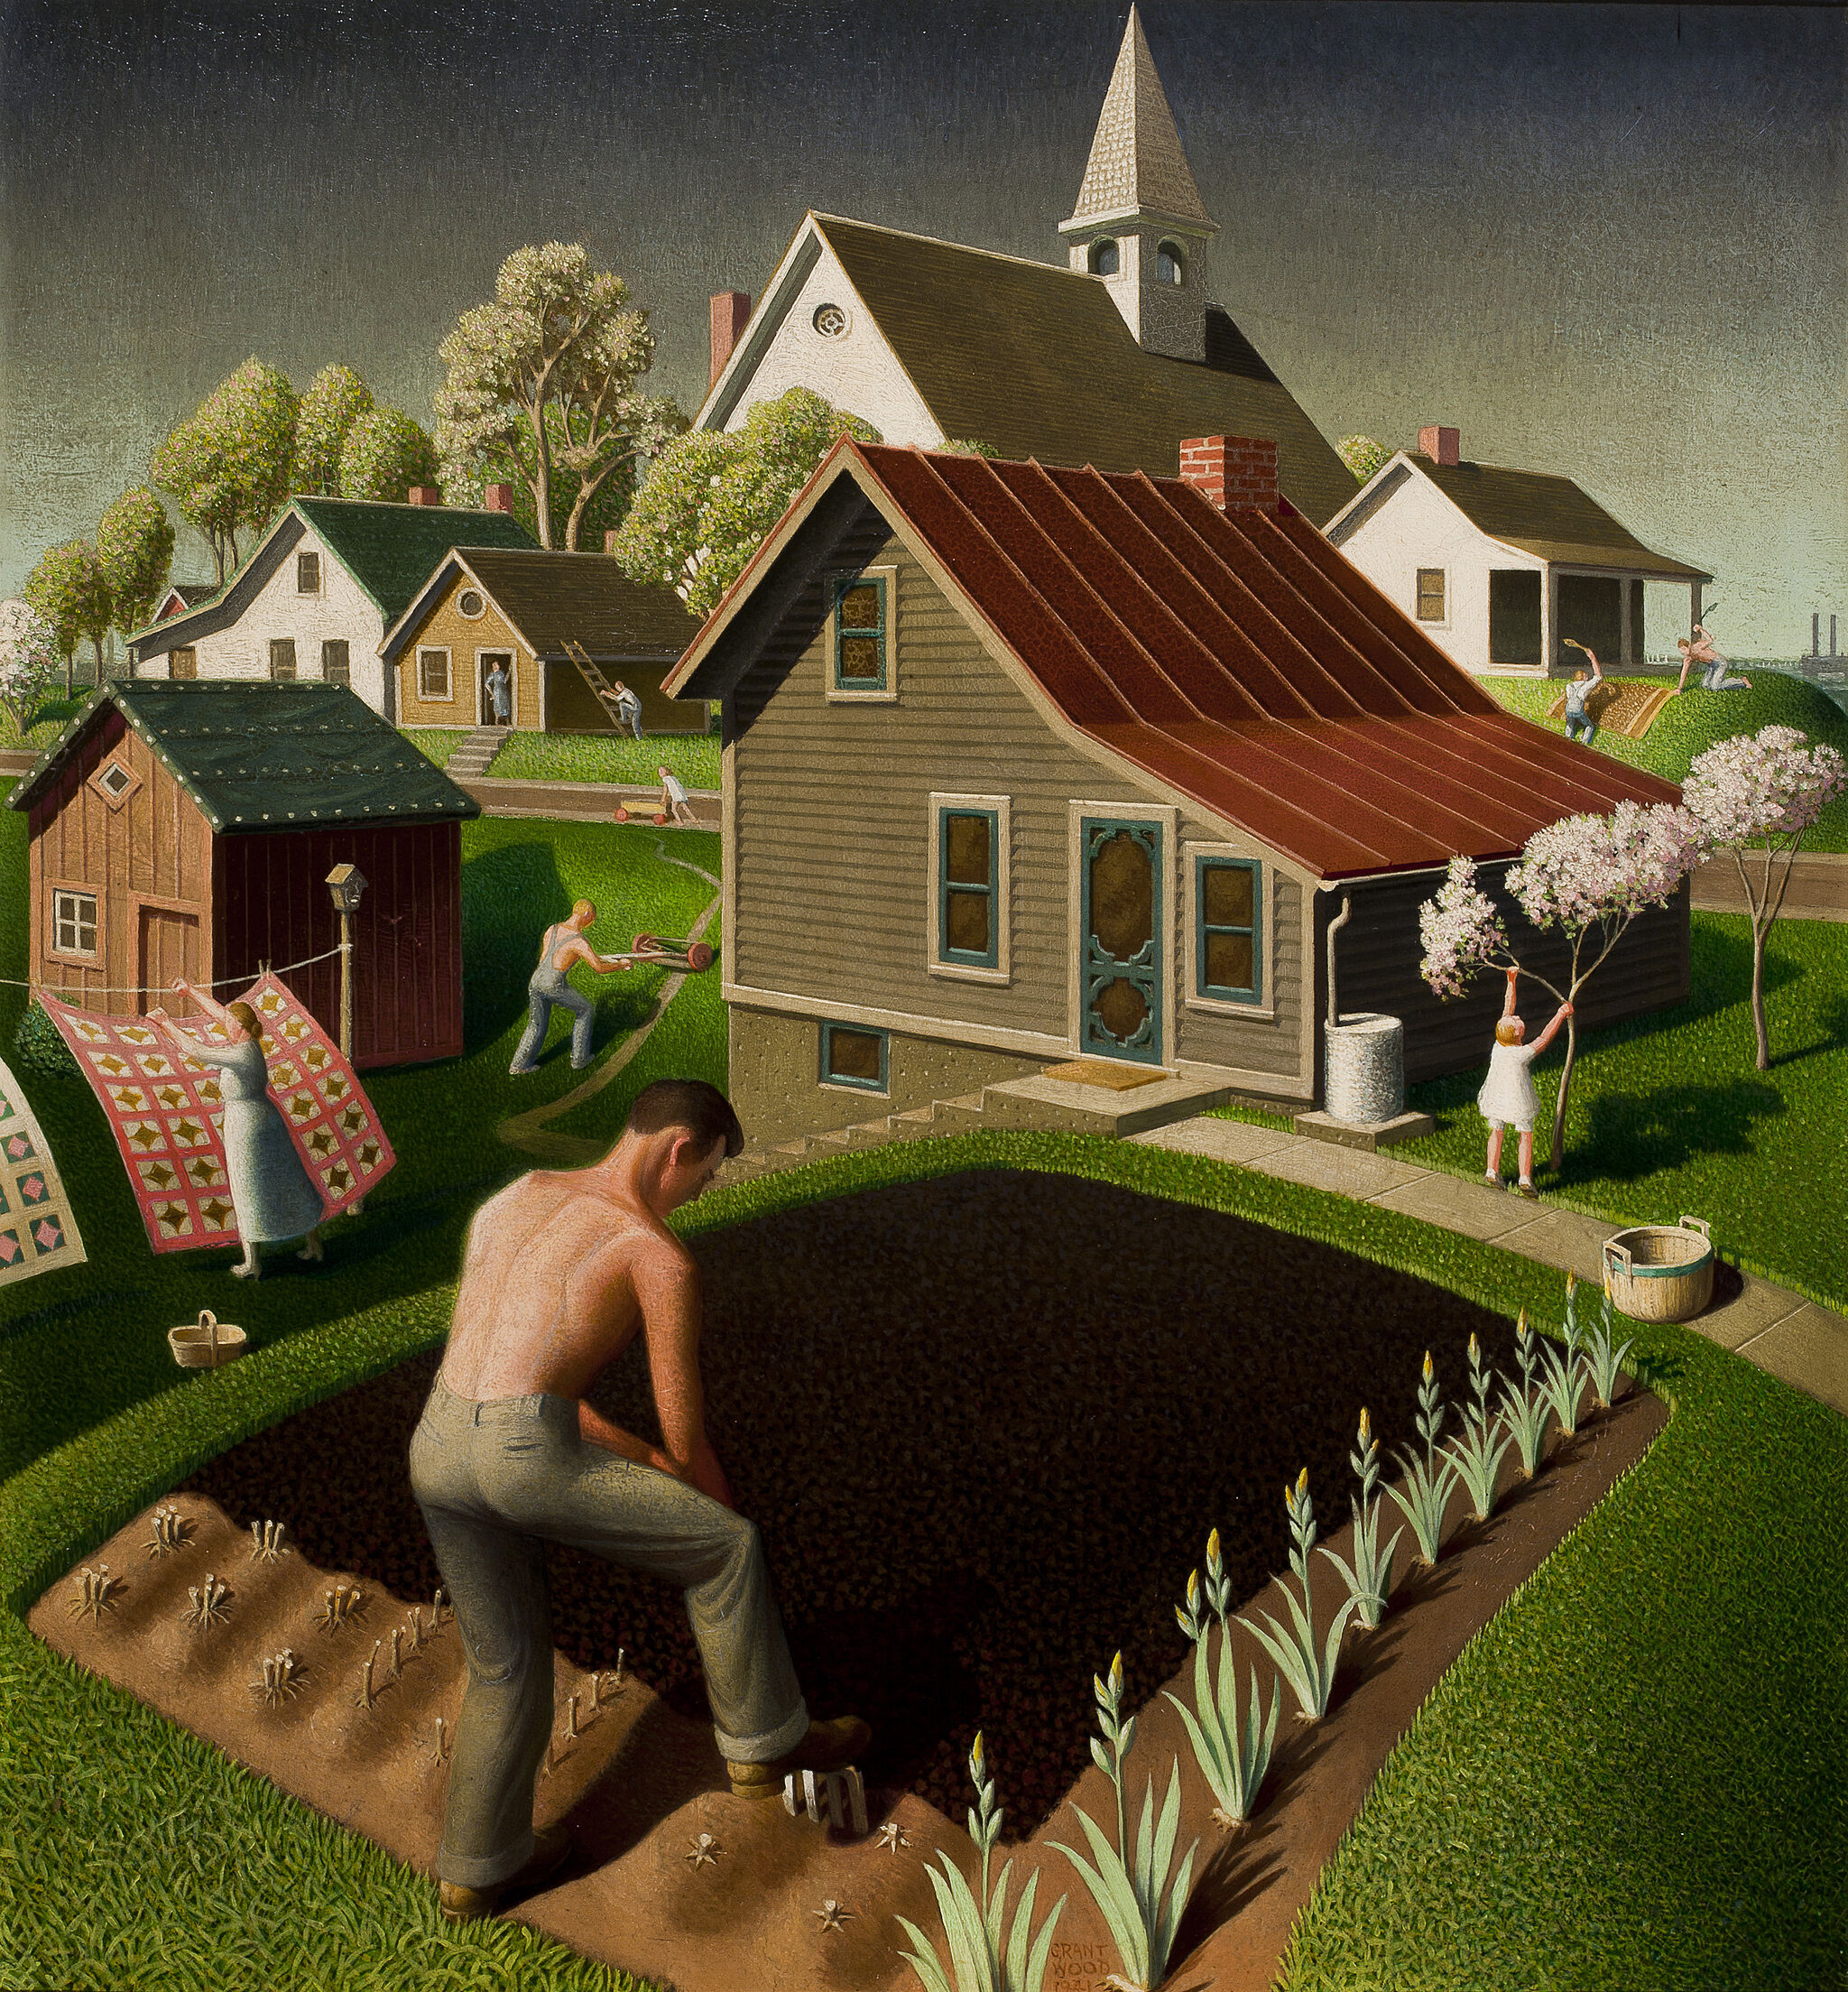 Painting of a spring town scene. A man plants a garden, a woman takes clothes off a line, a child reaches for a flower on a tree branch and a man mows his lawn.